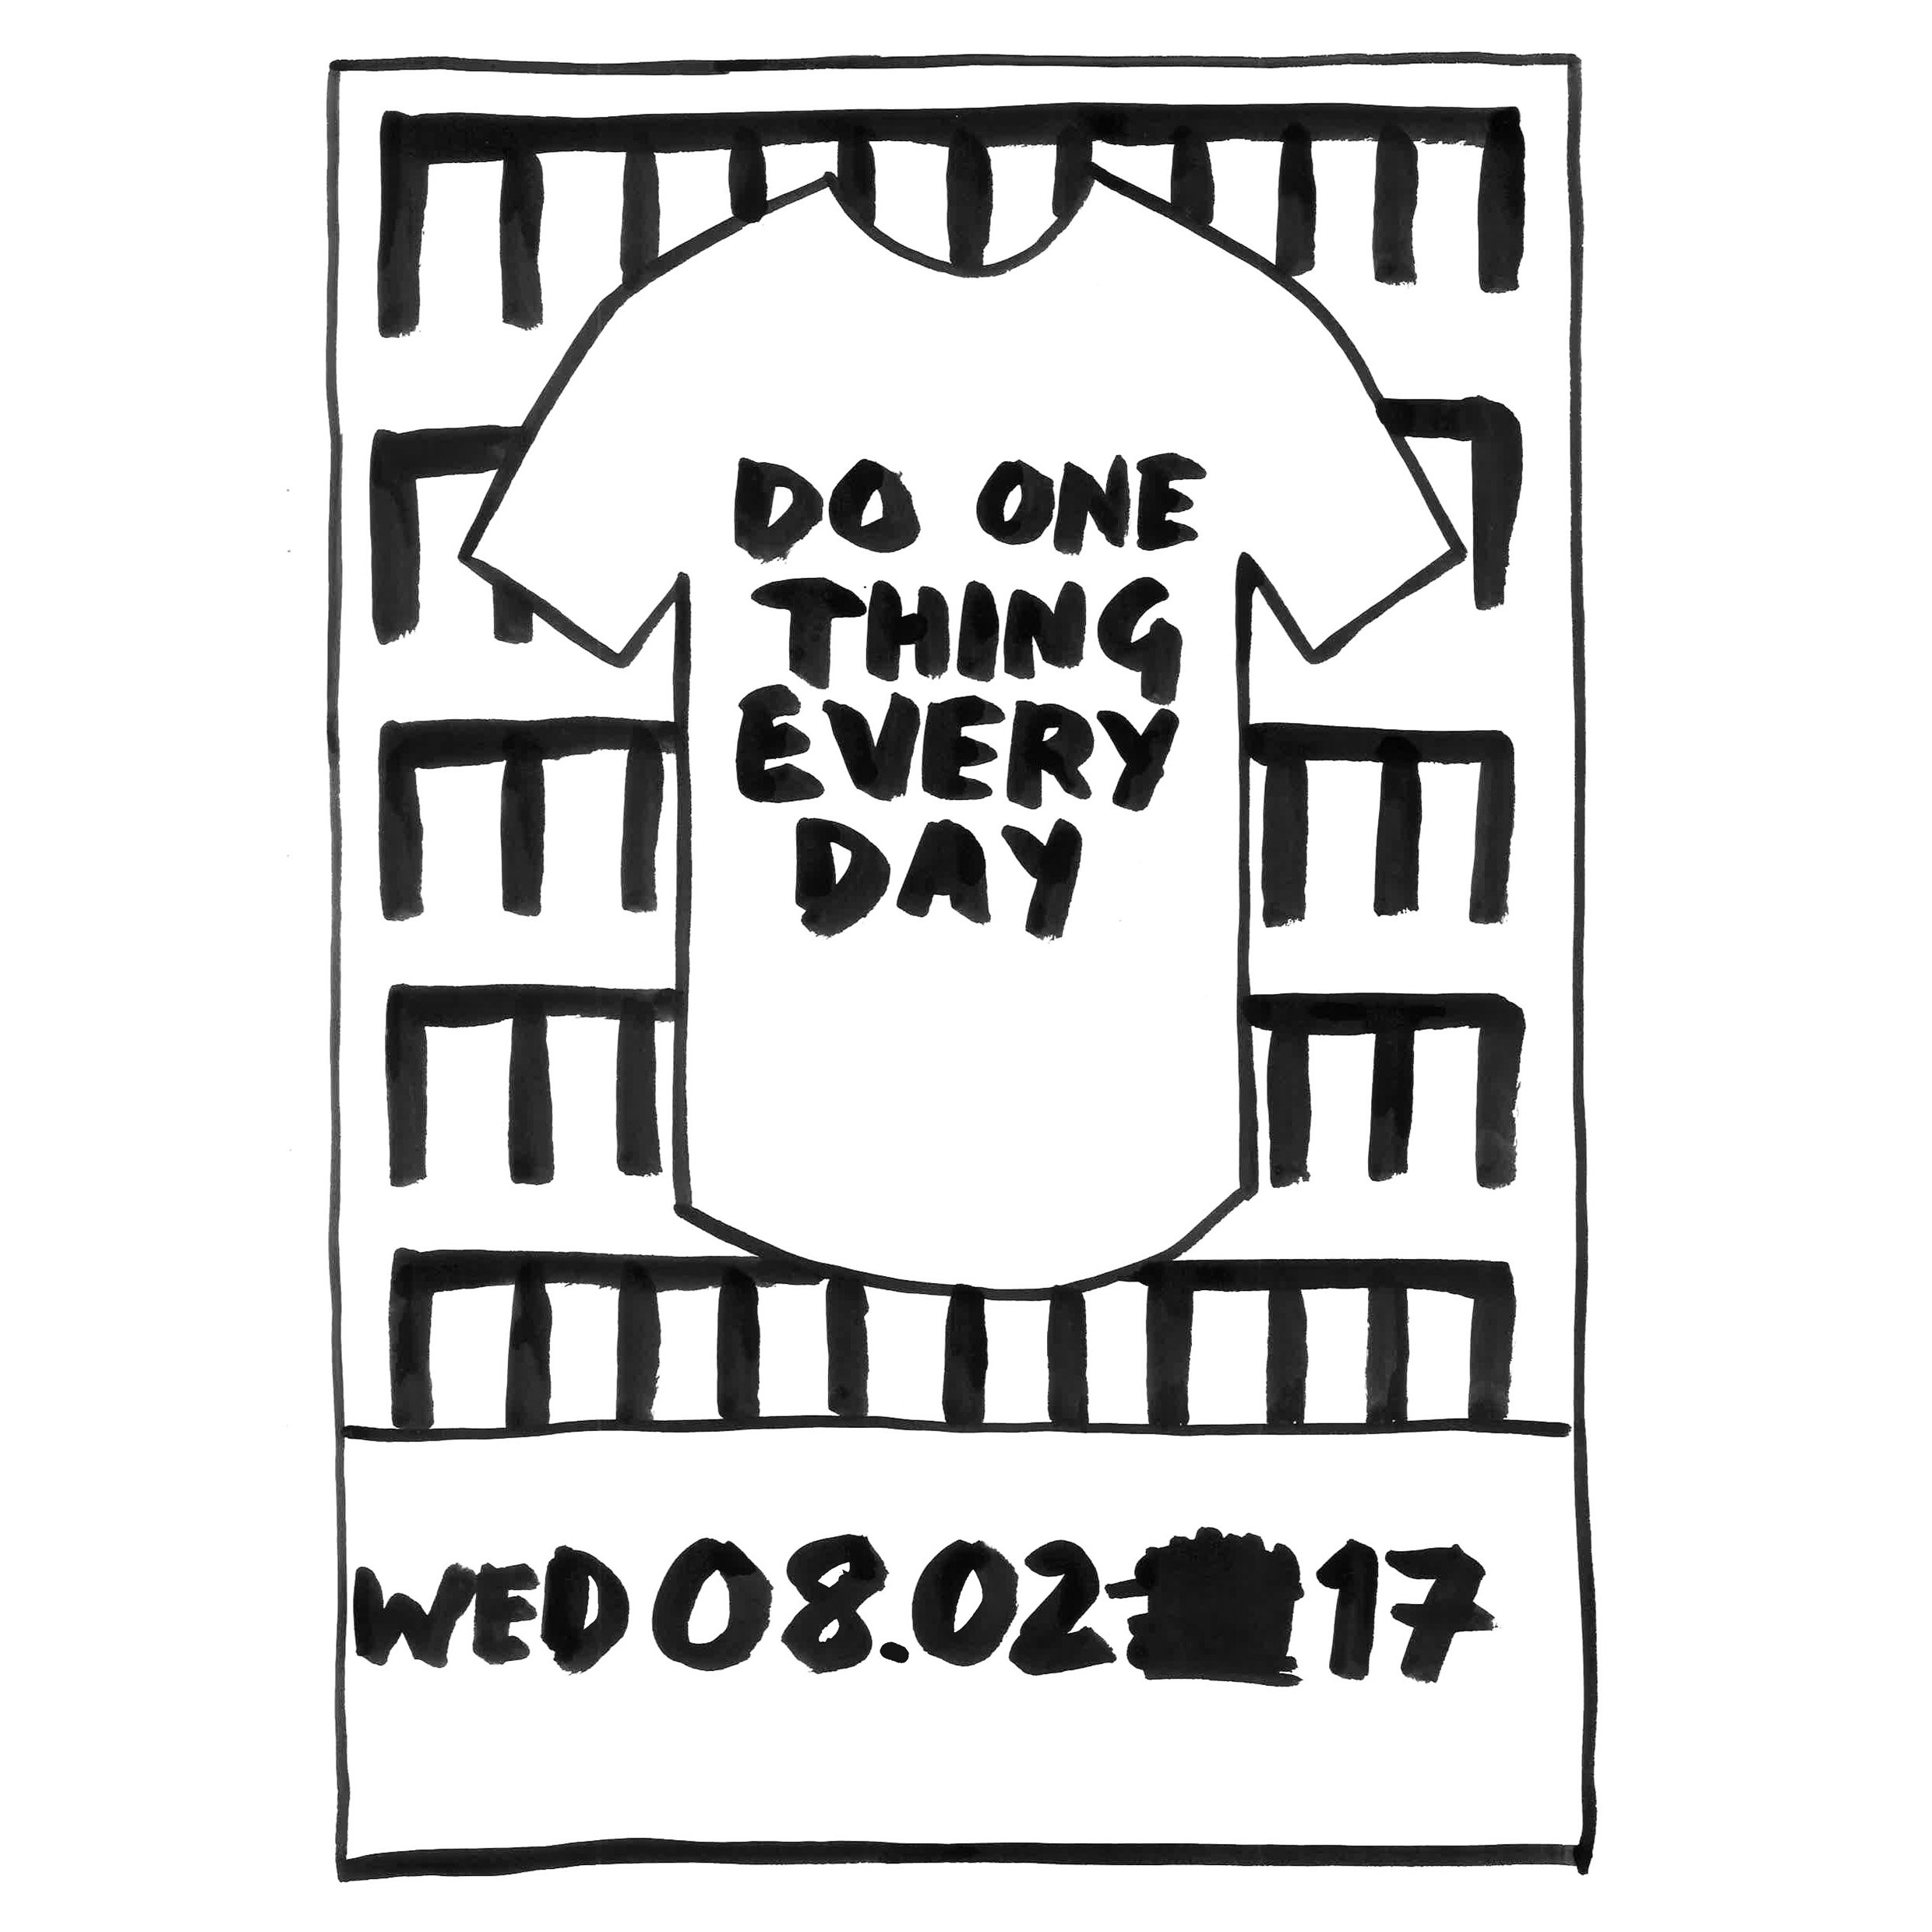 Do One Thing Every Day.jpg